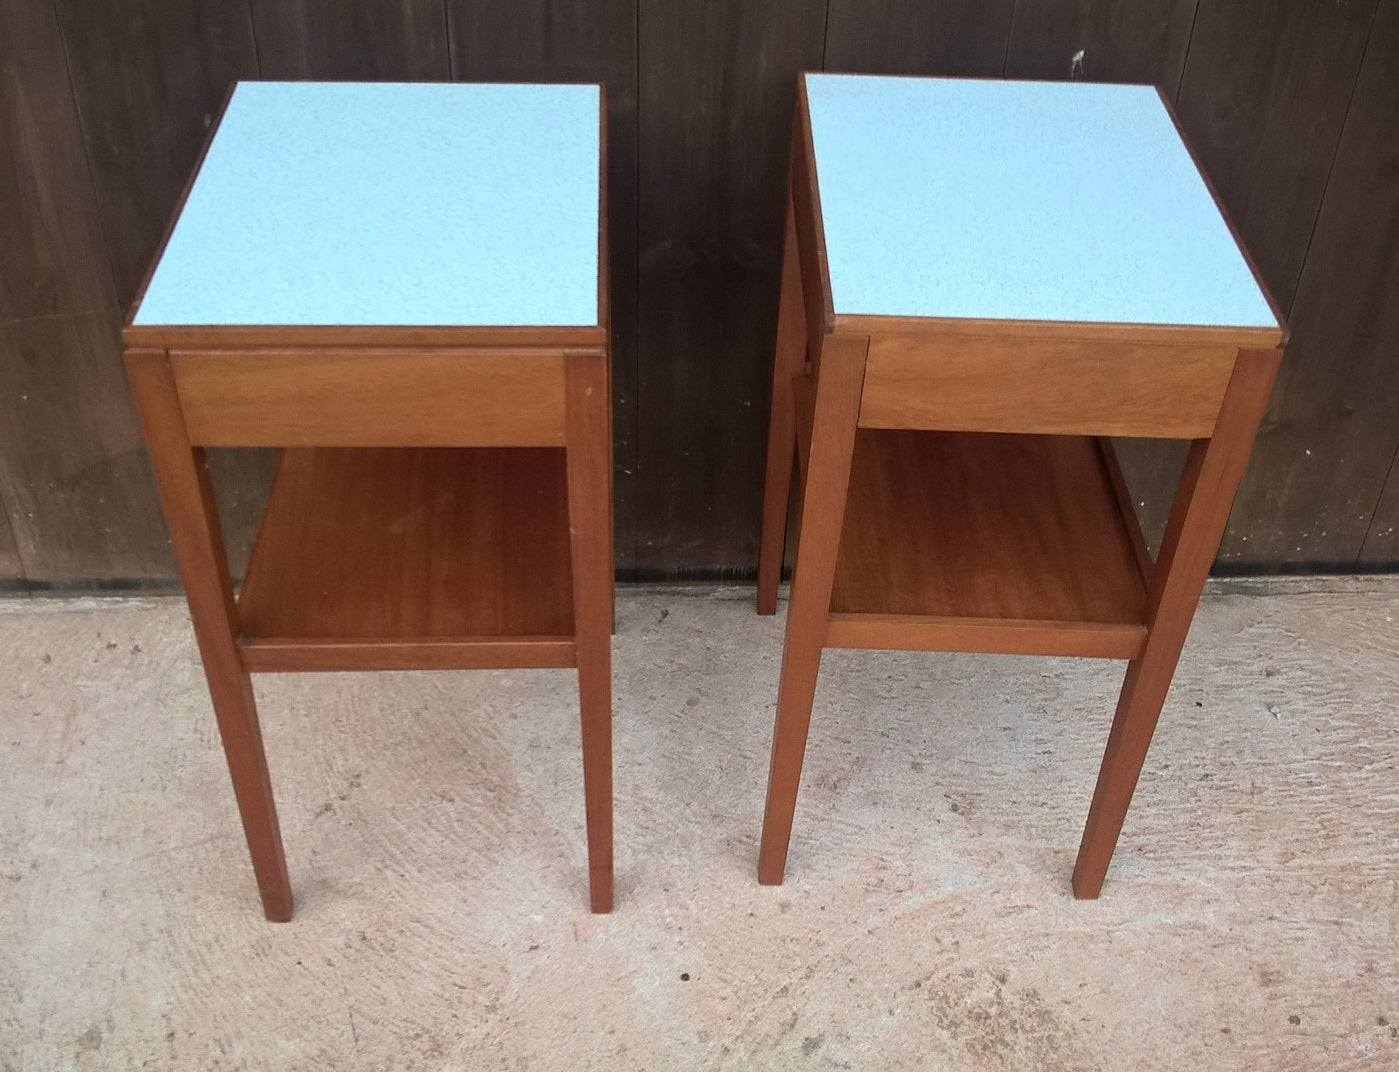 A PAIR OF TEAK RETRO BEDSIDE TABLES - RETRO LAMP TABLE